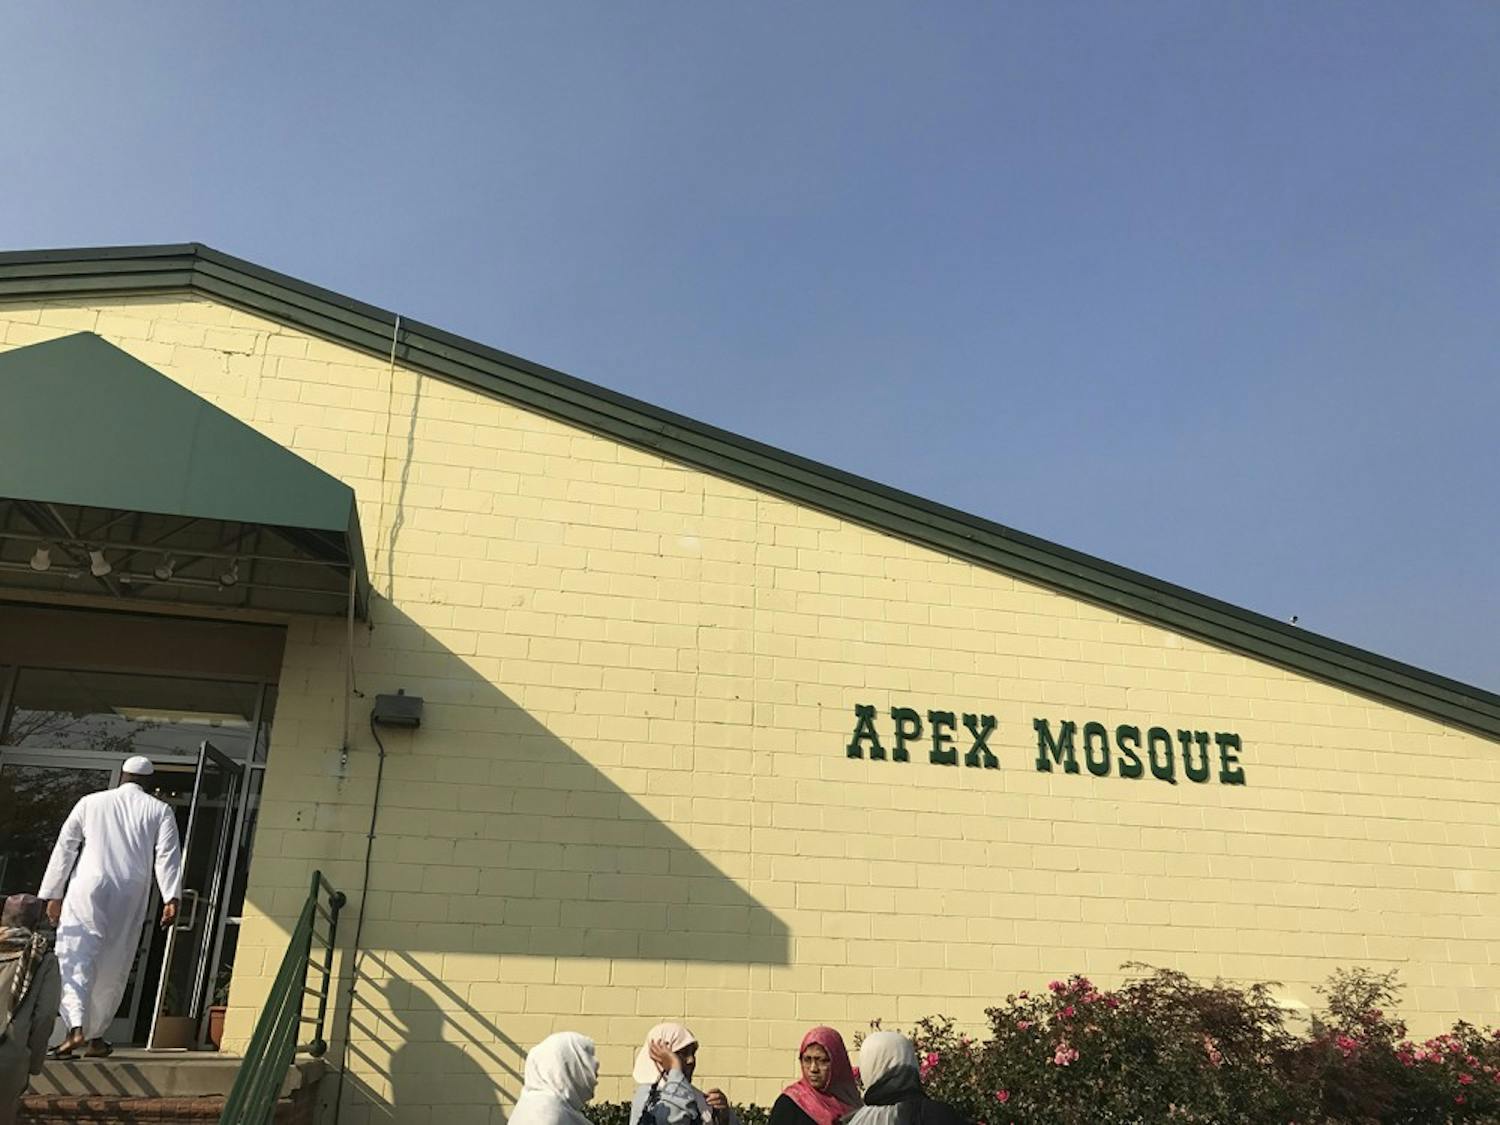 Students visited the Apex Mosque to gain exposure to the Arabic and Islamic culture and gain better understanding of Muslim community in the area.